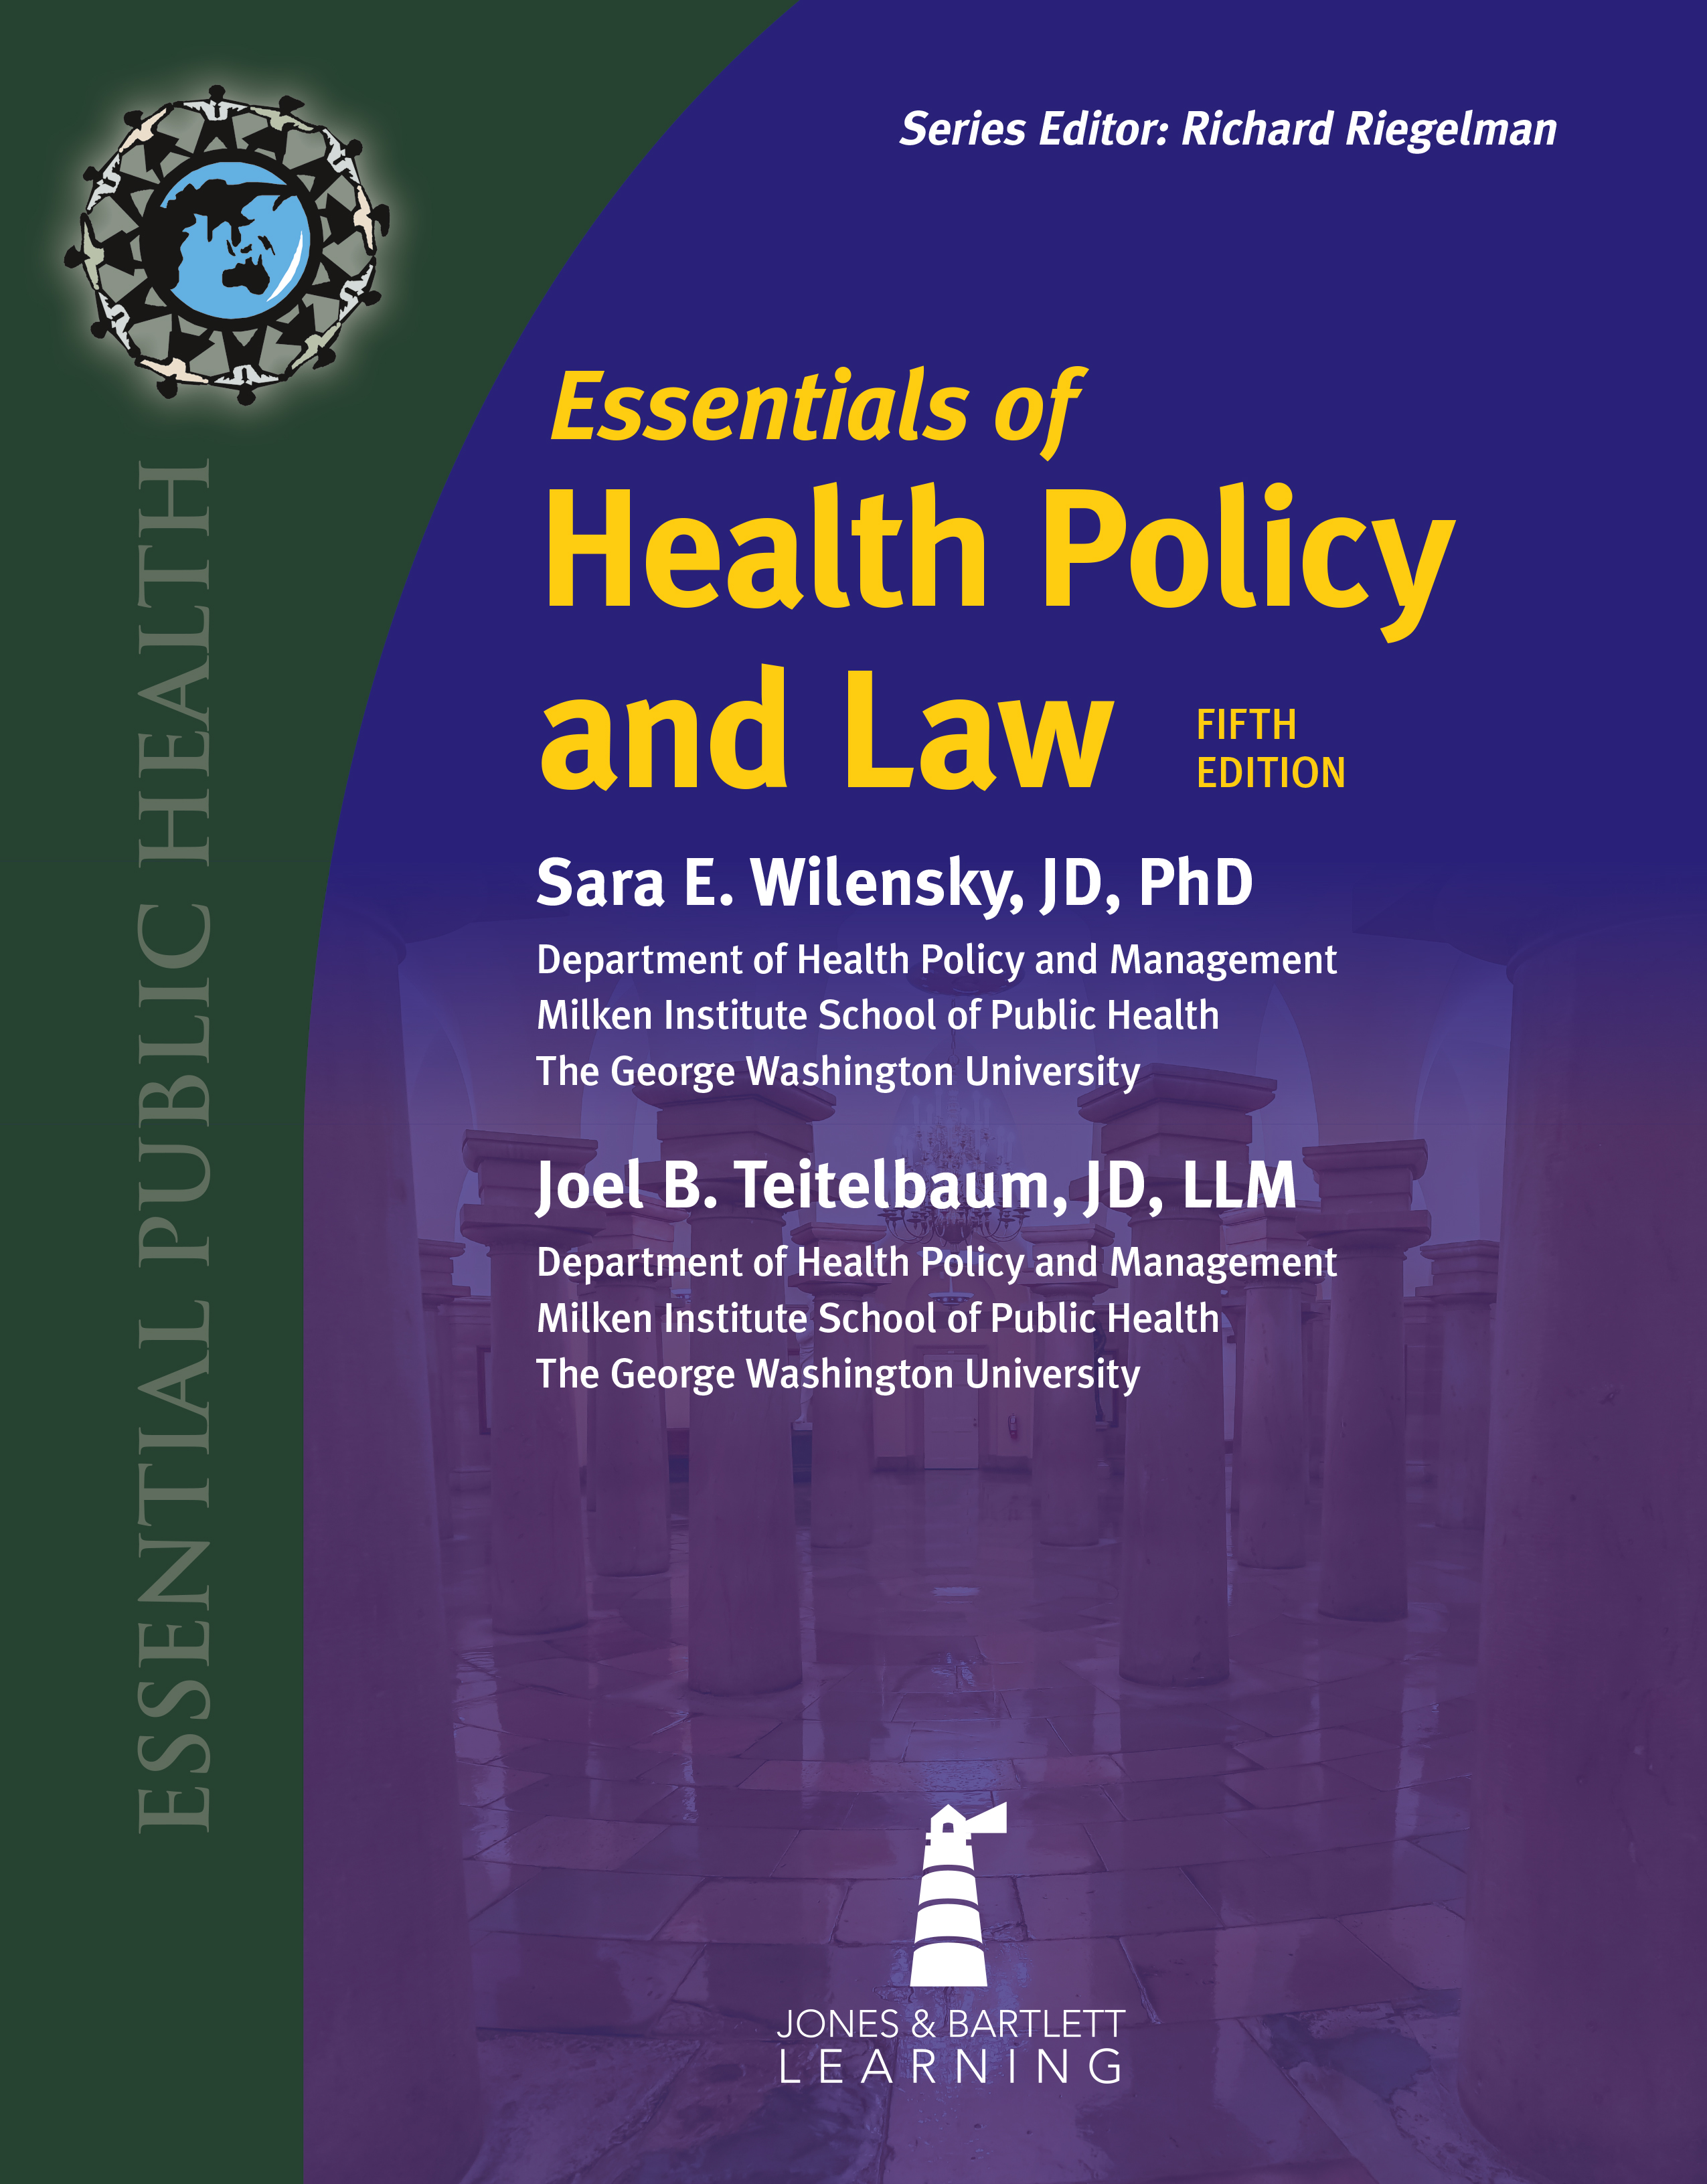 Essentials of Health Policy and Law - image 2